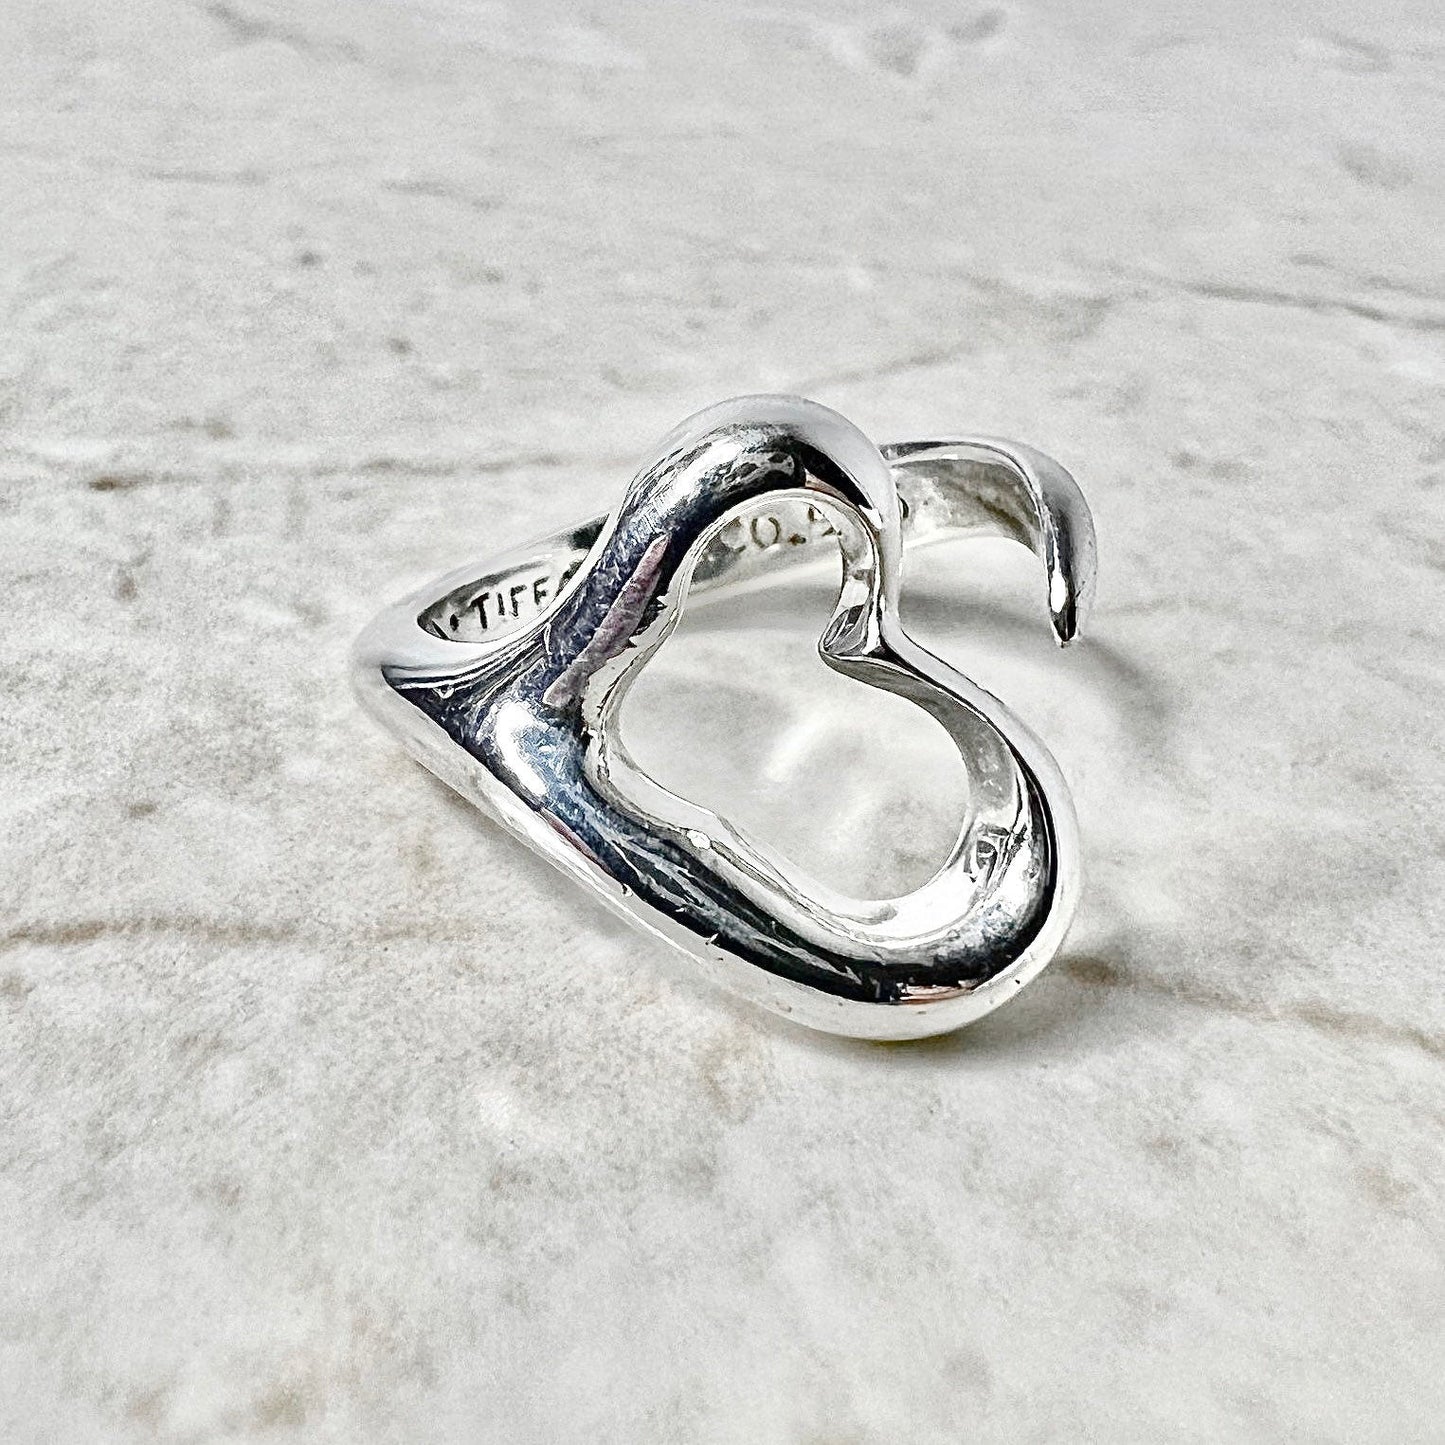 Tiffany & Co Elsa Peretti Open Heart Ring - Sterling Silver Tiffany Open Heart Ring - Silver Tiffany Heart Ring-Valentine’s Day Gift For Her